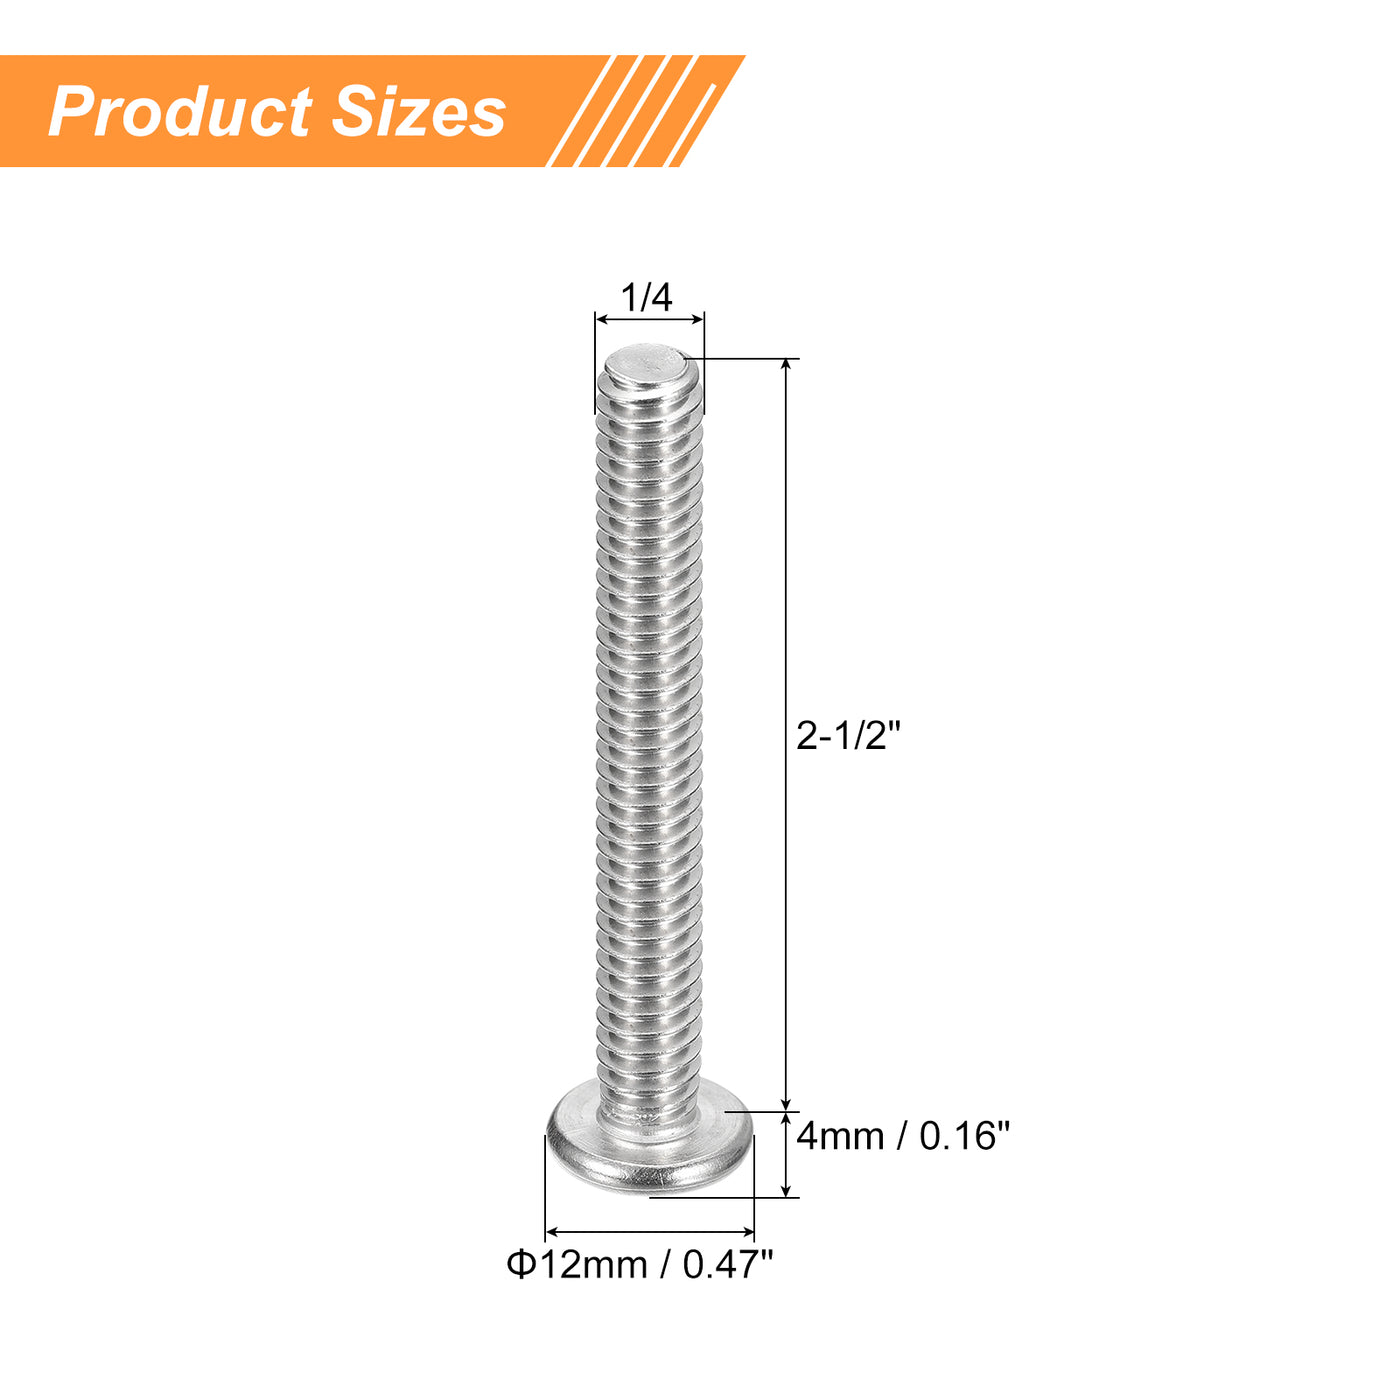 uxcell Uxcell 1/4-20x2-1/2" Pan Head Machine Screws, Stainless Steel 18-8 Screw, Pack of 10